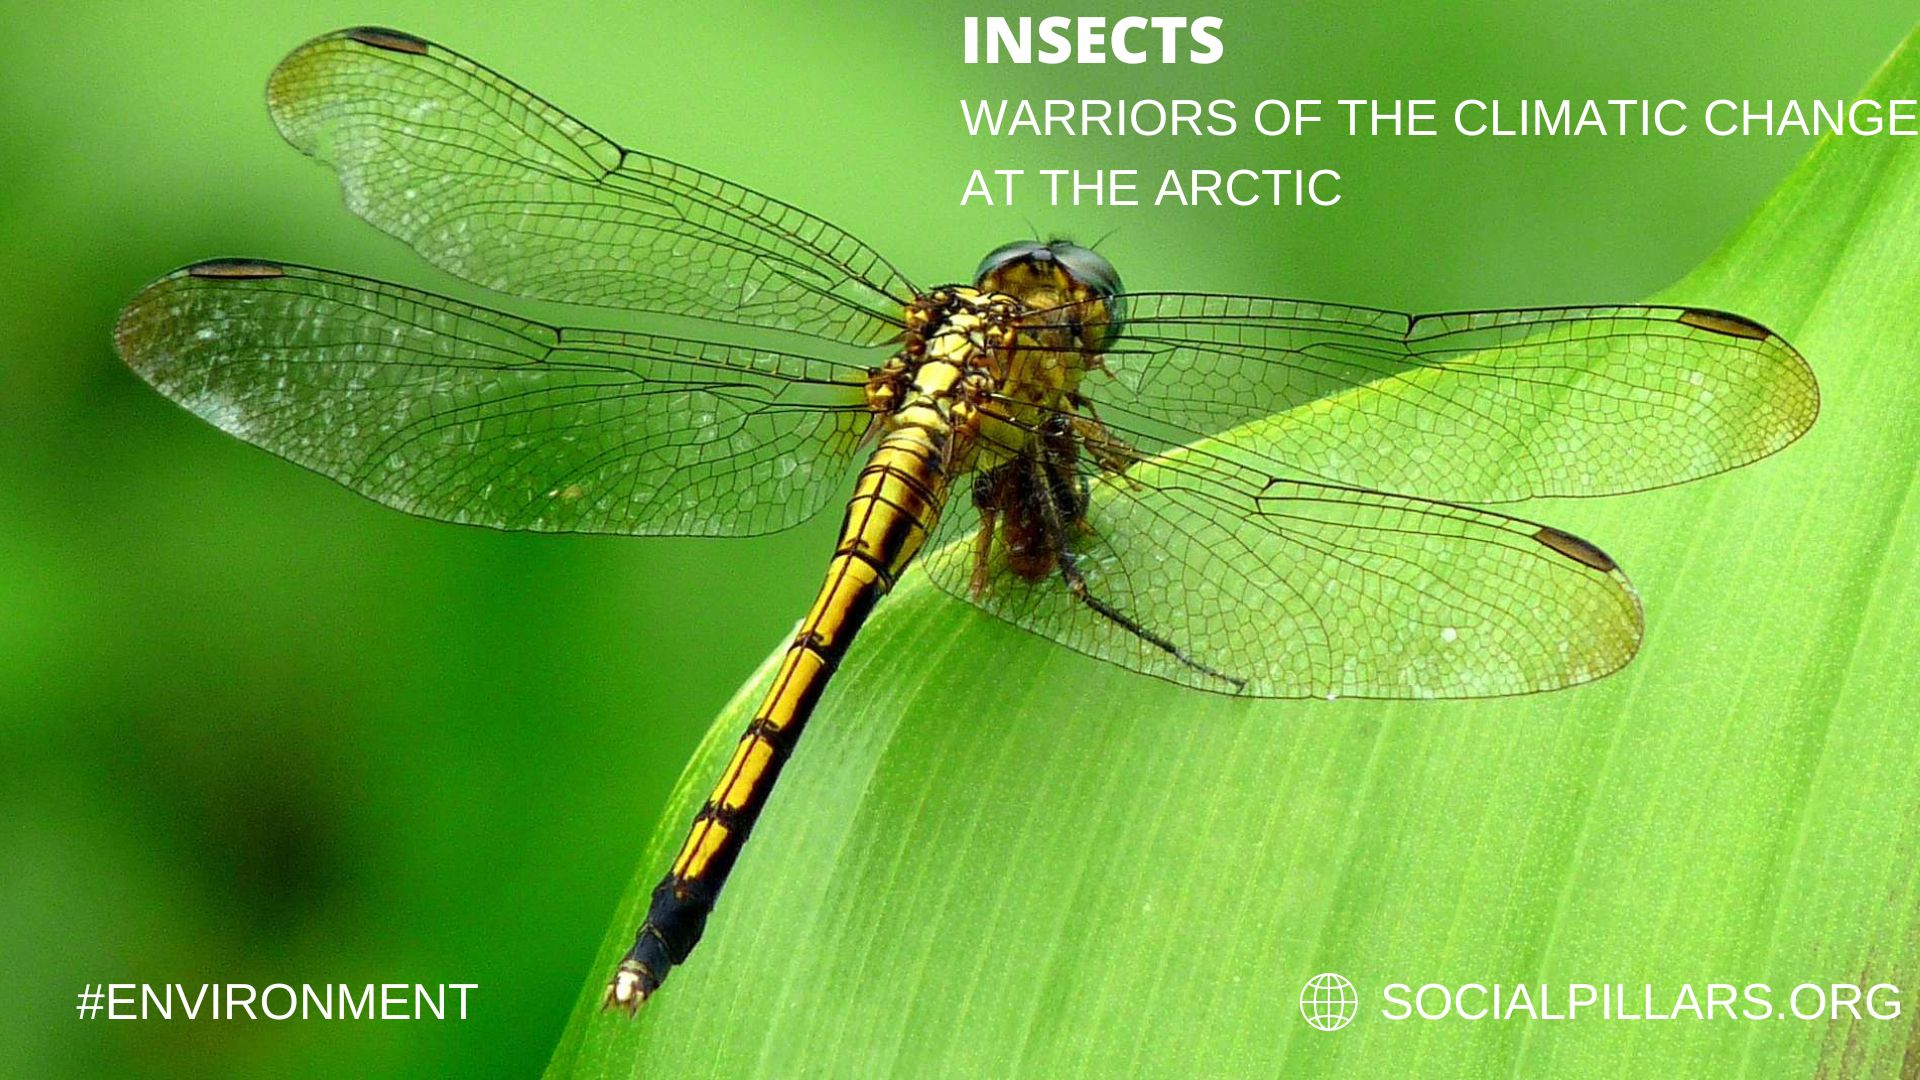 INSECTS WARRIORS OF THE CLIMATIC CHANGE AT THE ARCTIC